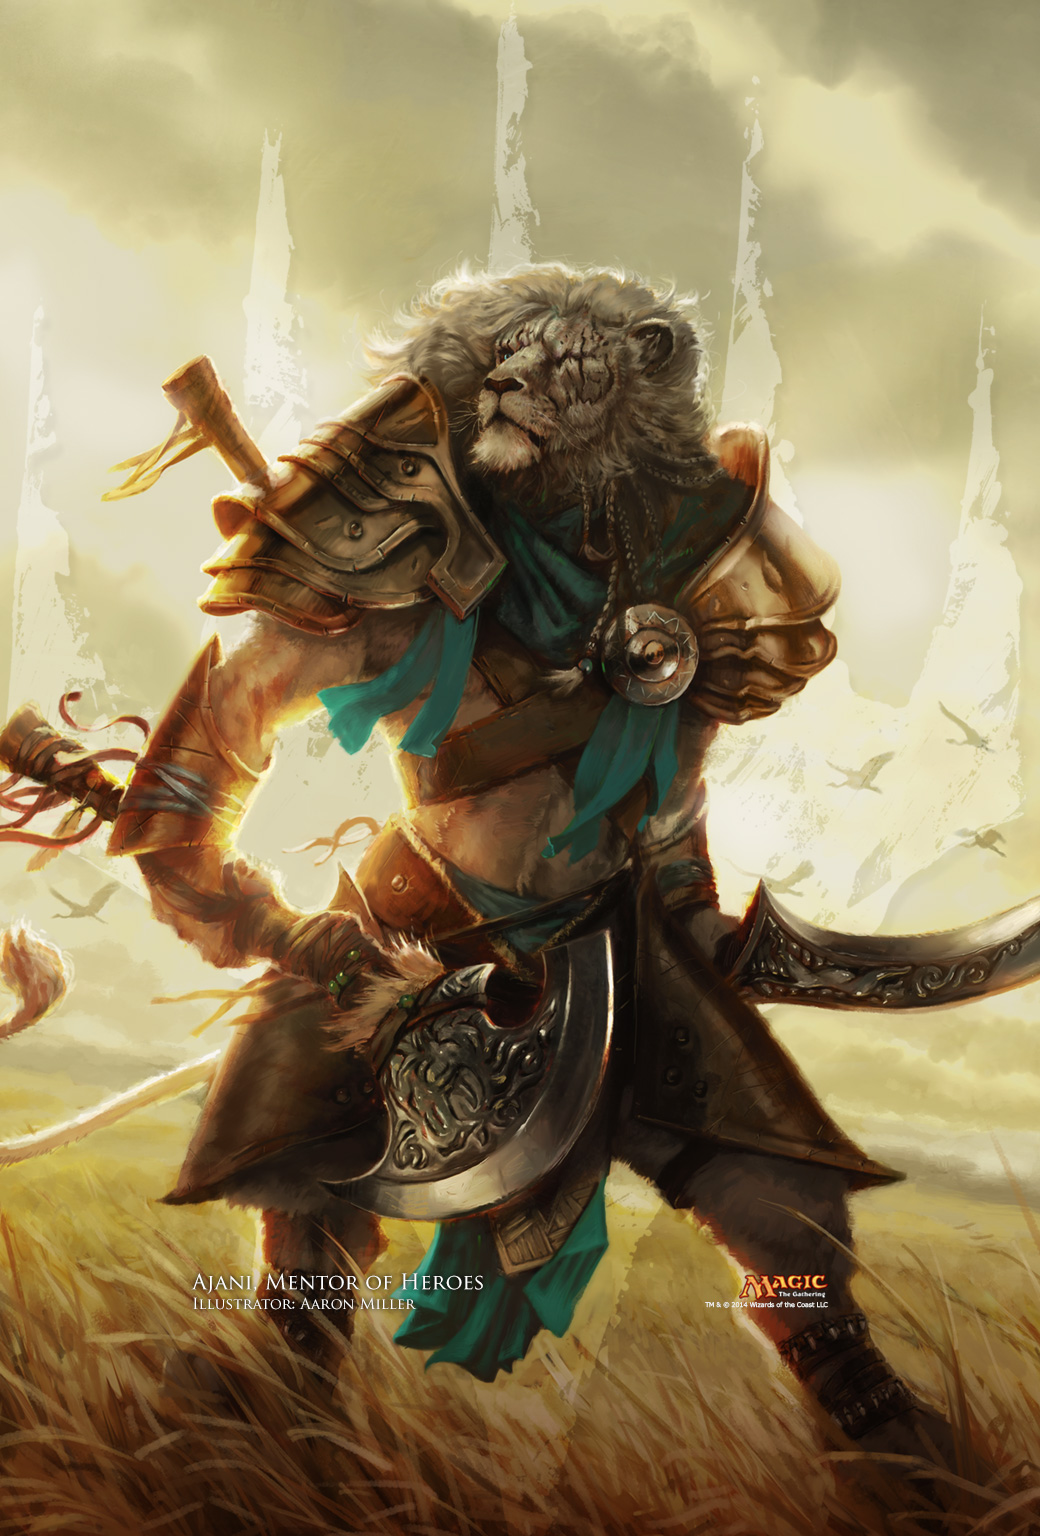 Wallpaper of the Week: Ajani, Mentor of Heroes | MAGIC: THE GATHERING